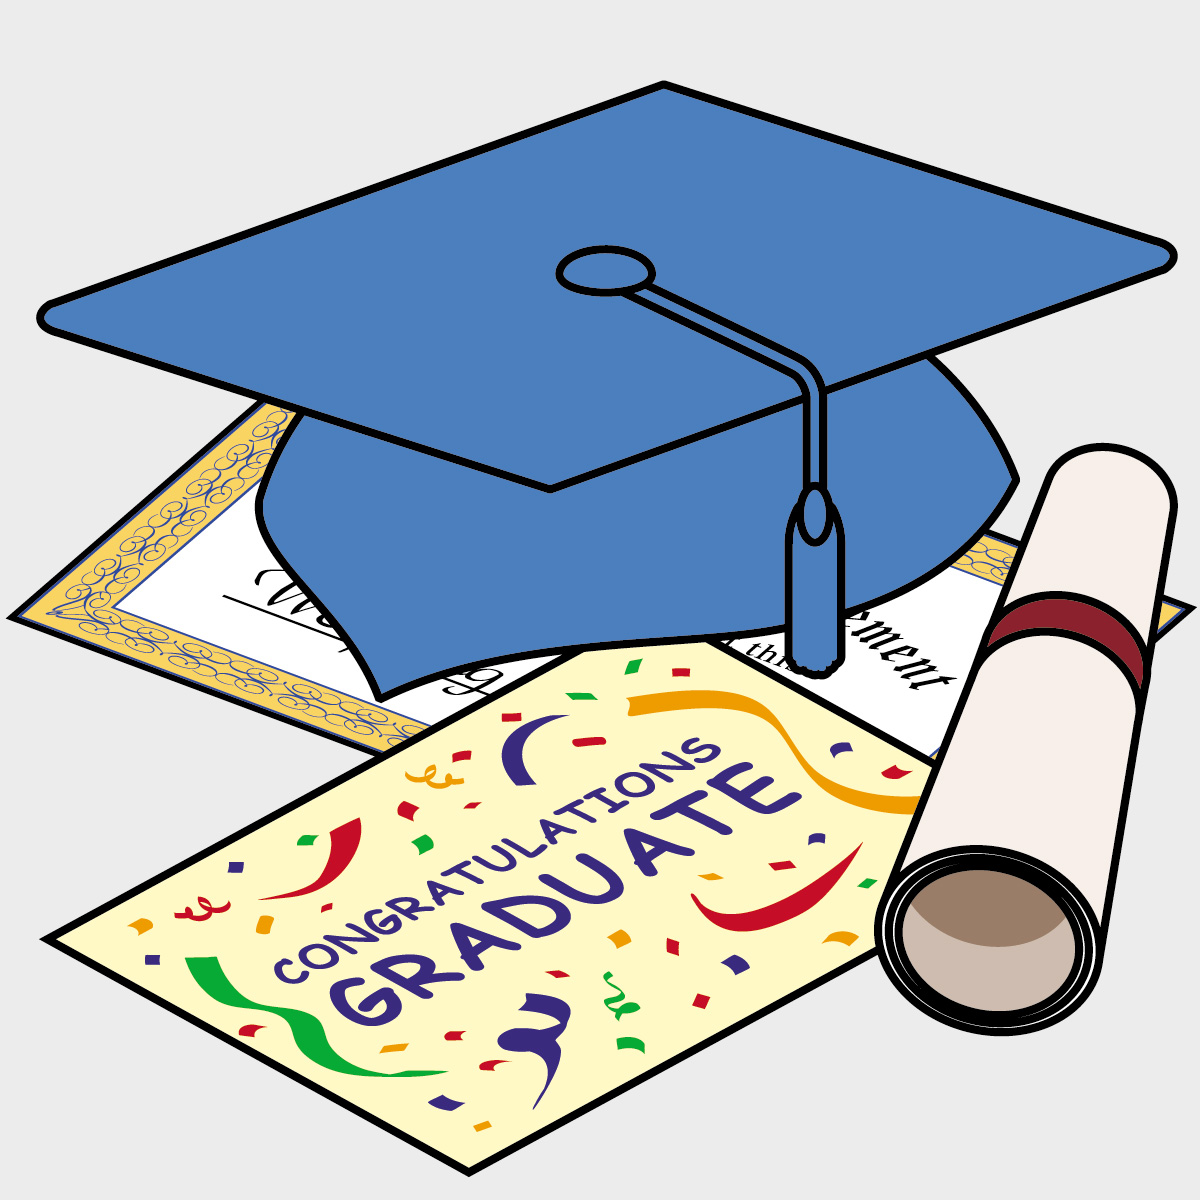 clipart related to education - photo #1